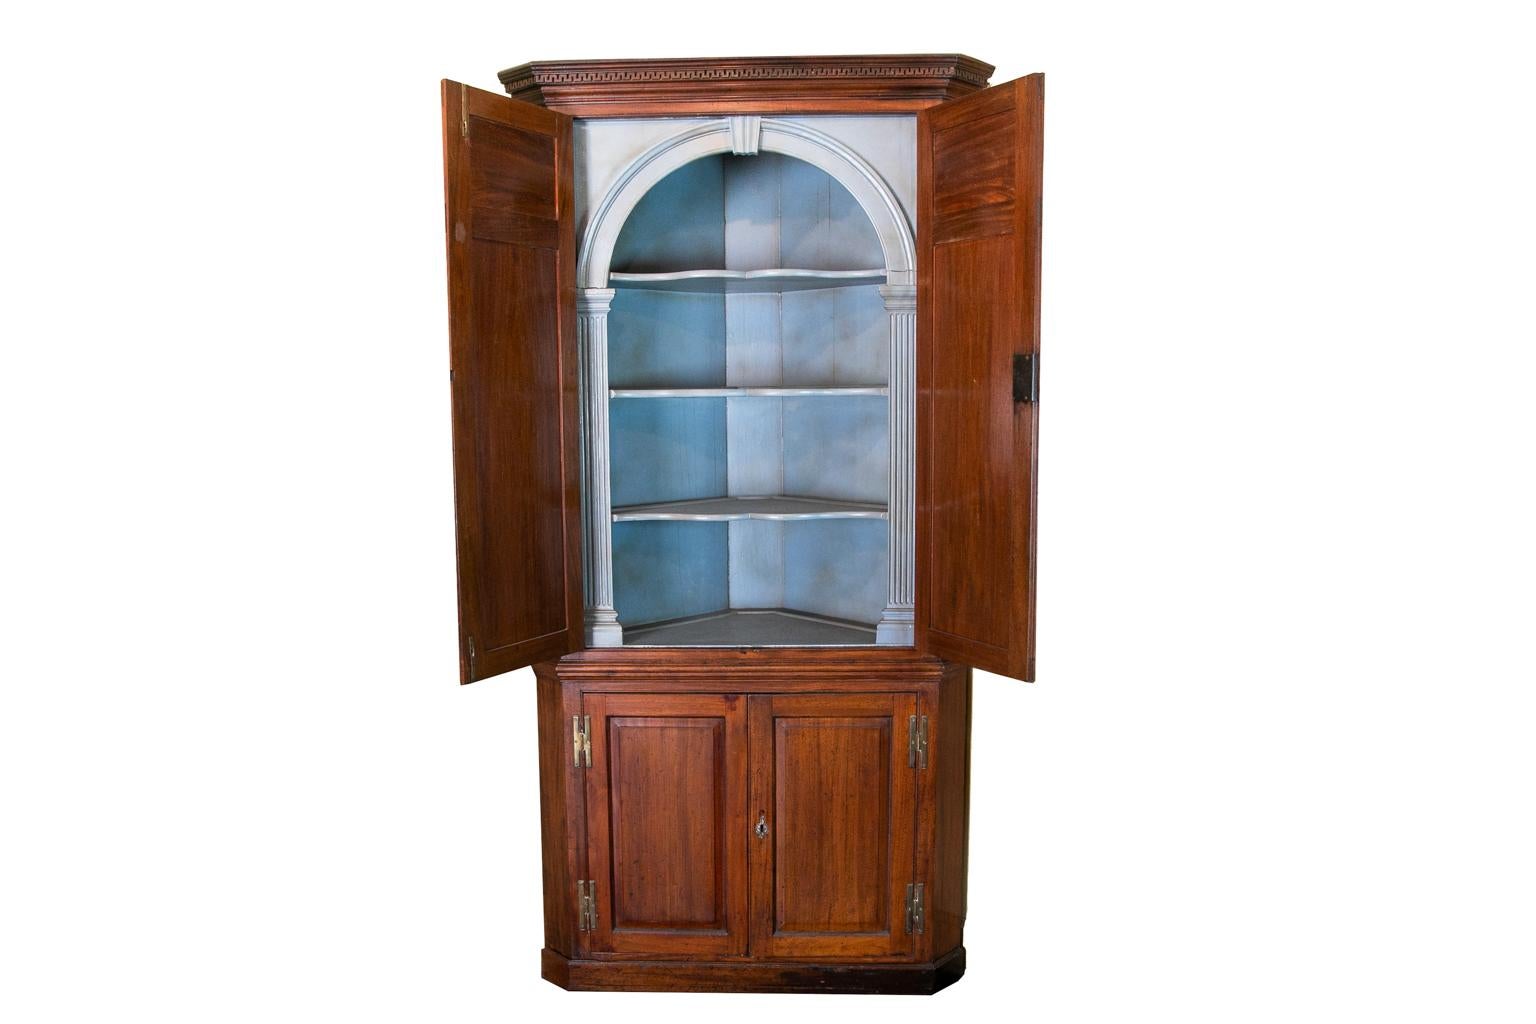 English George III corner cupboard has raised panel doors, the cornice with wall of troy molding. The interior has butterfly shelves with fluted columns and an arch with key stone. It has the original five inch brass H hinges. This piece has superb